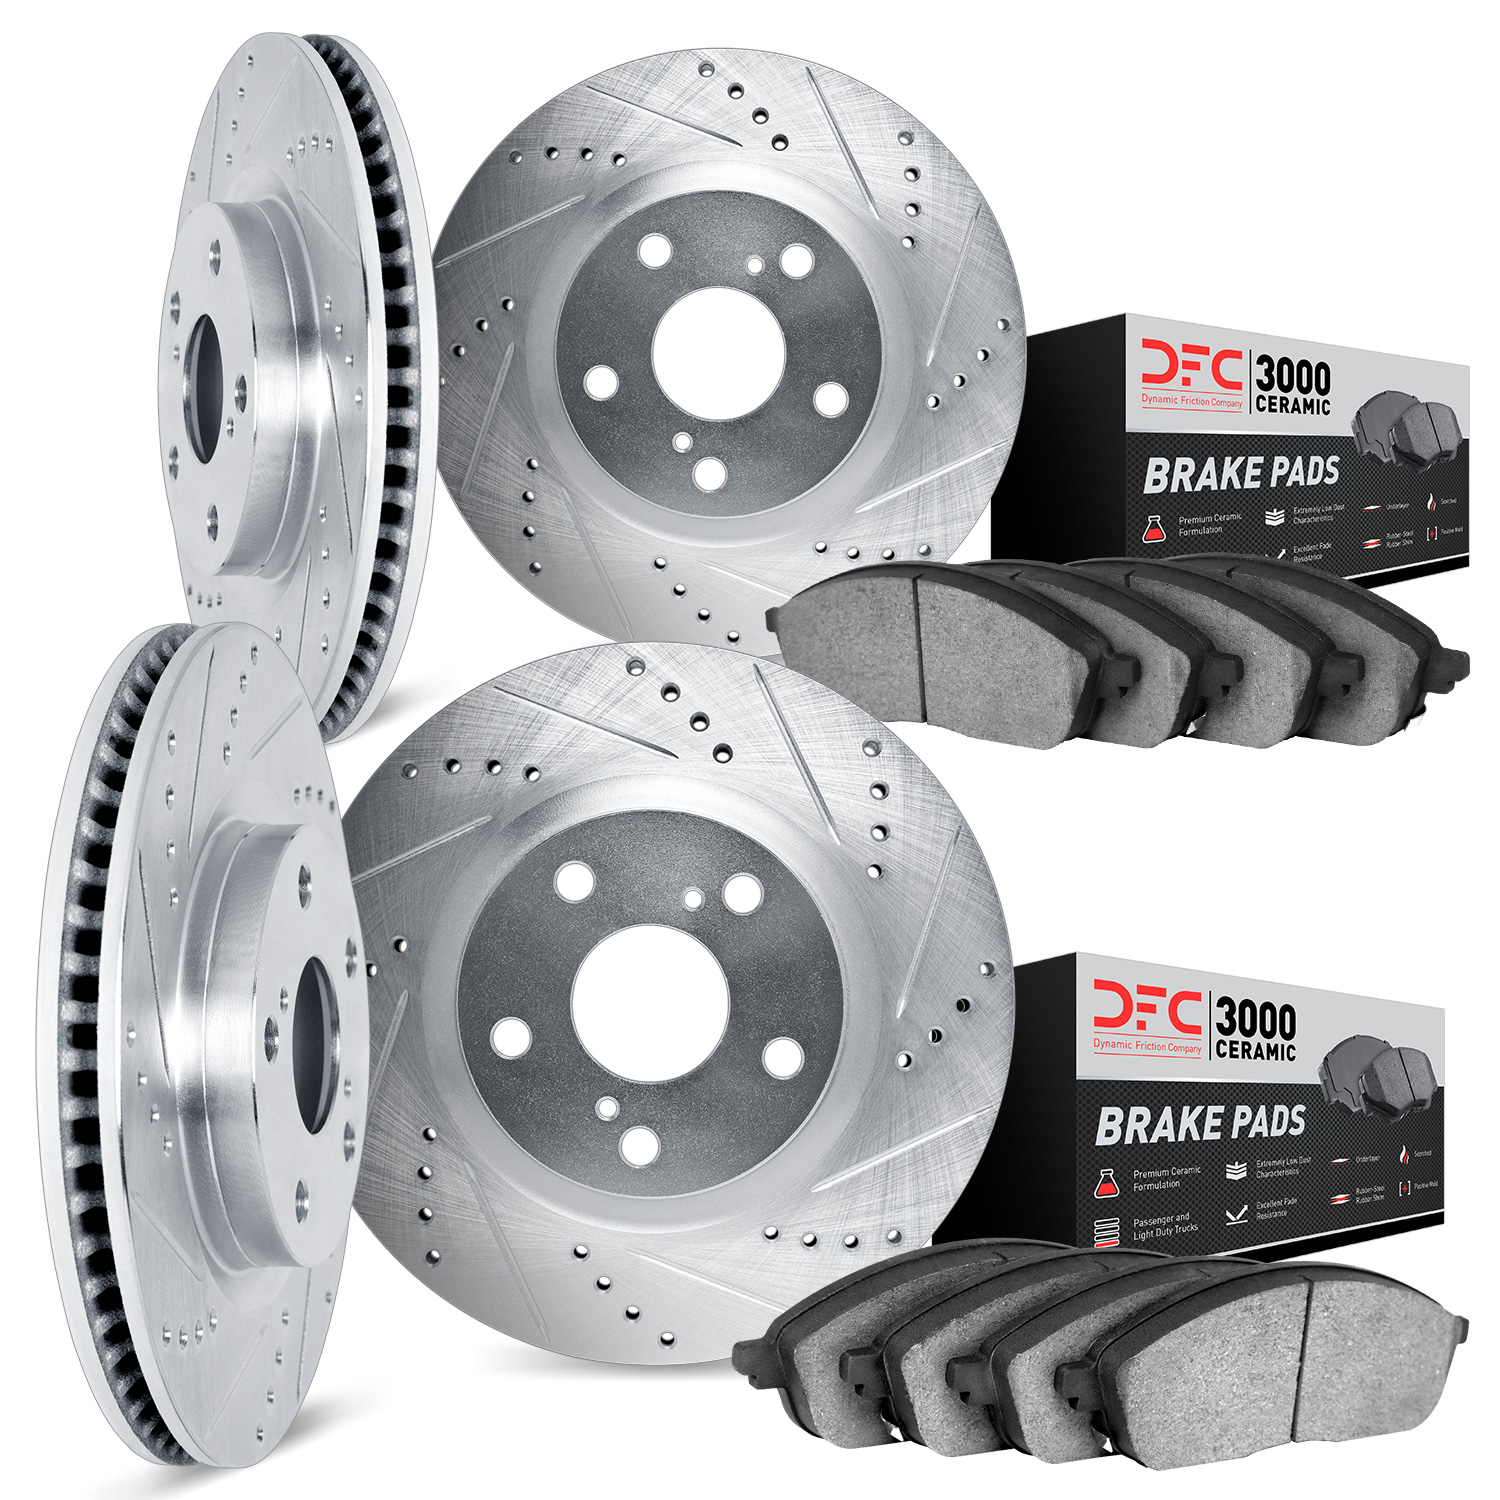 7304-76030 Drilled/Slotted Brake Rotor with 3000-Series Ceramic Brake Pads Kit [Silver], 1991-1996 Lexus/Toyota/Scion, Position: